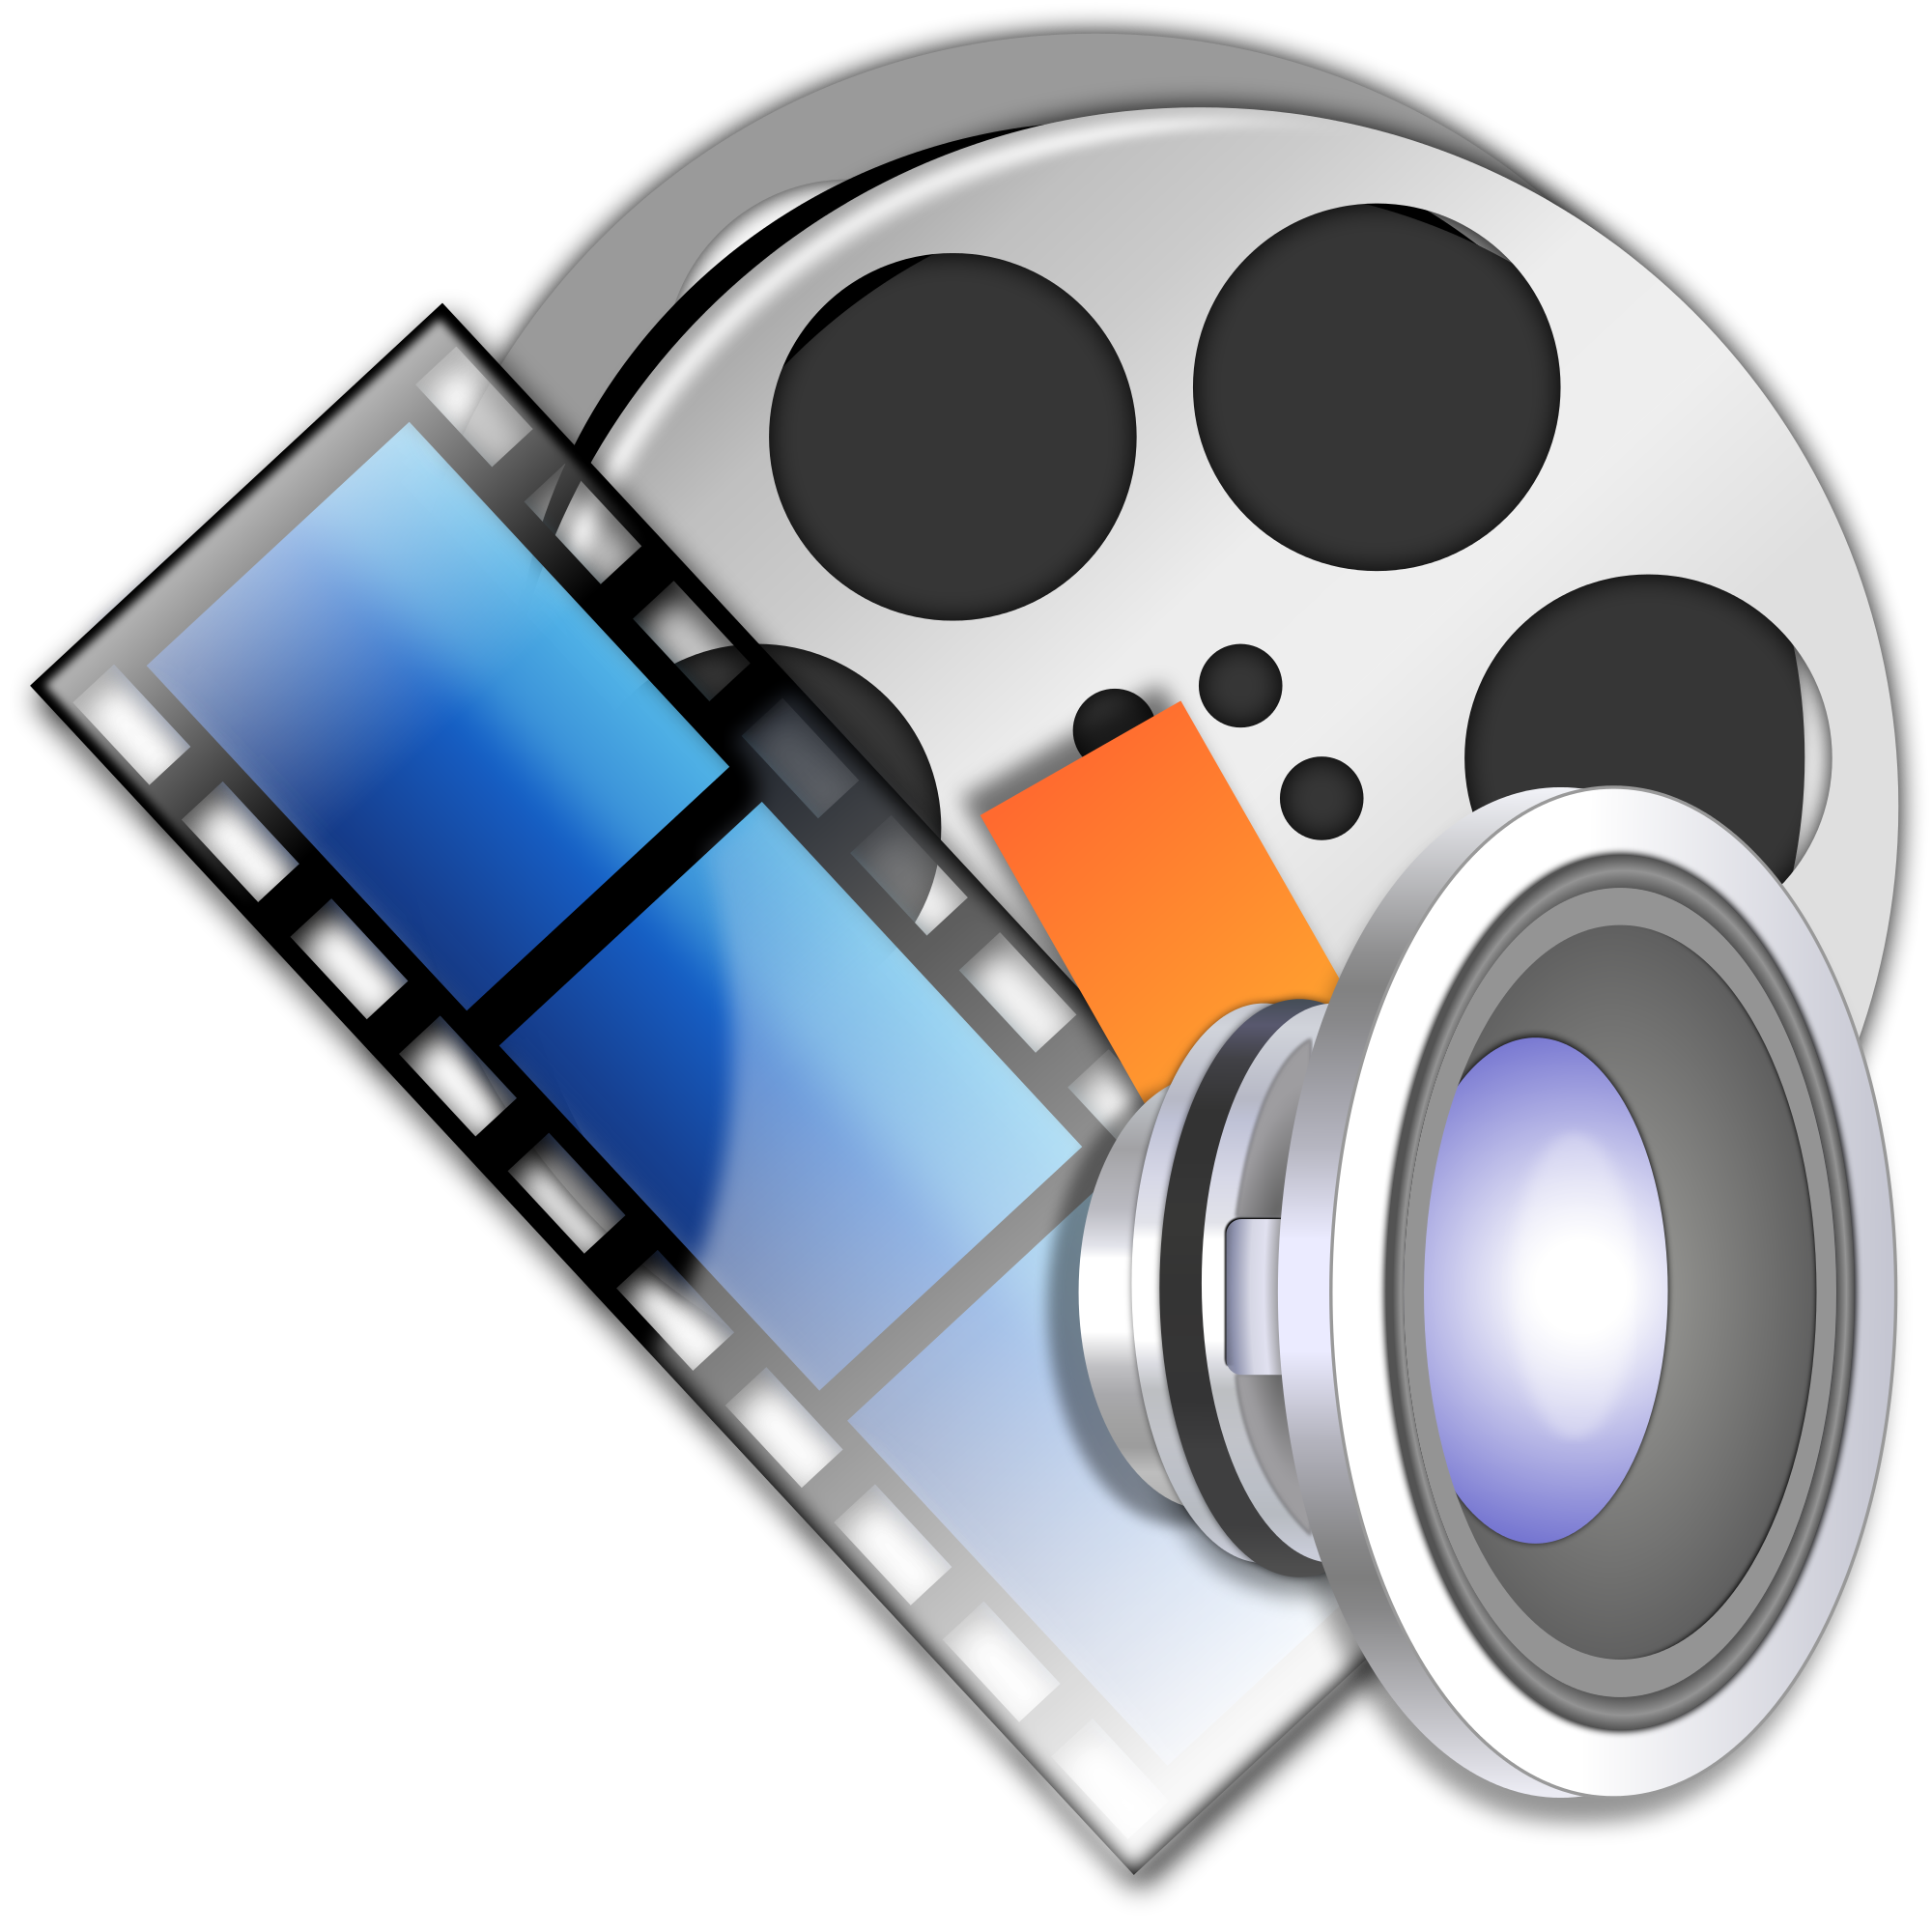 can you edit videos on vlc media player